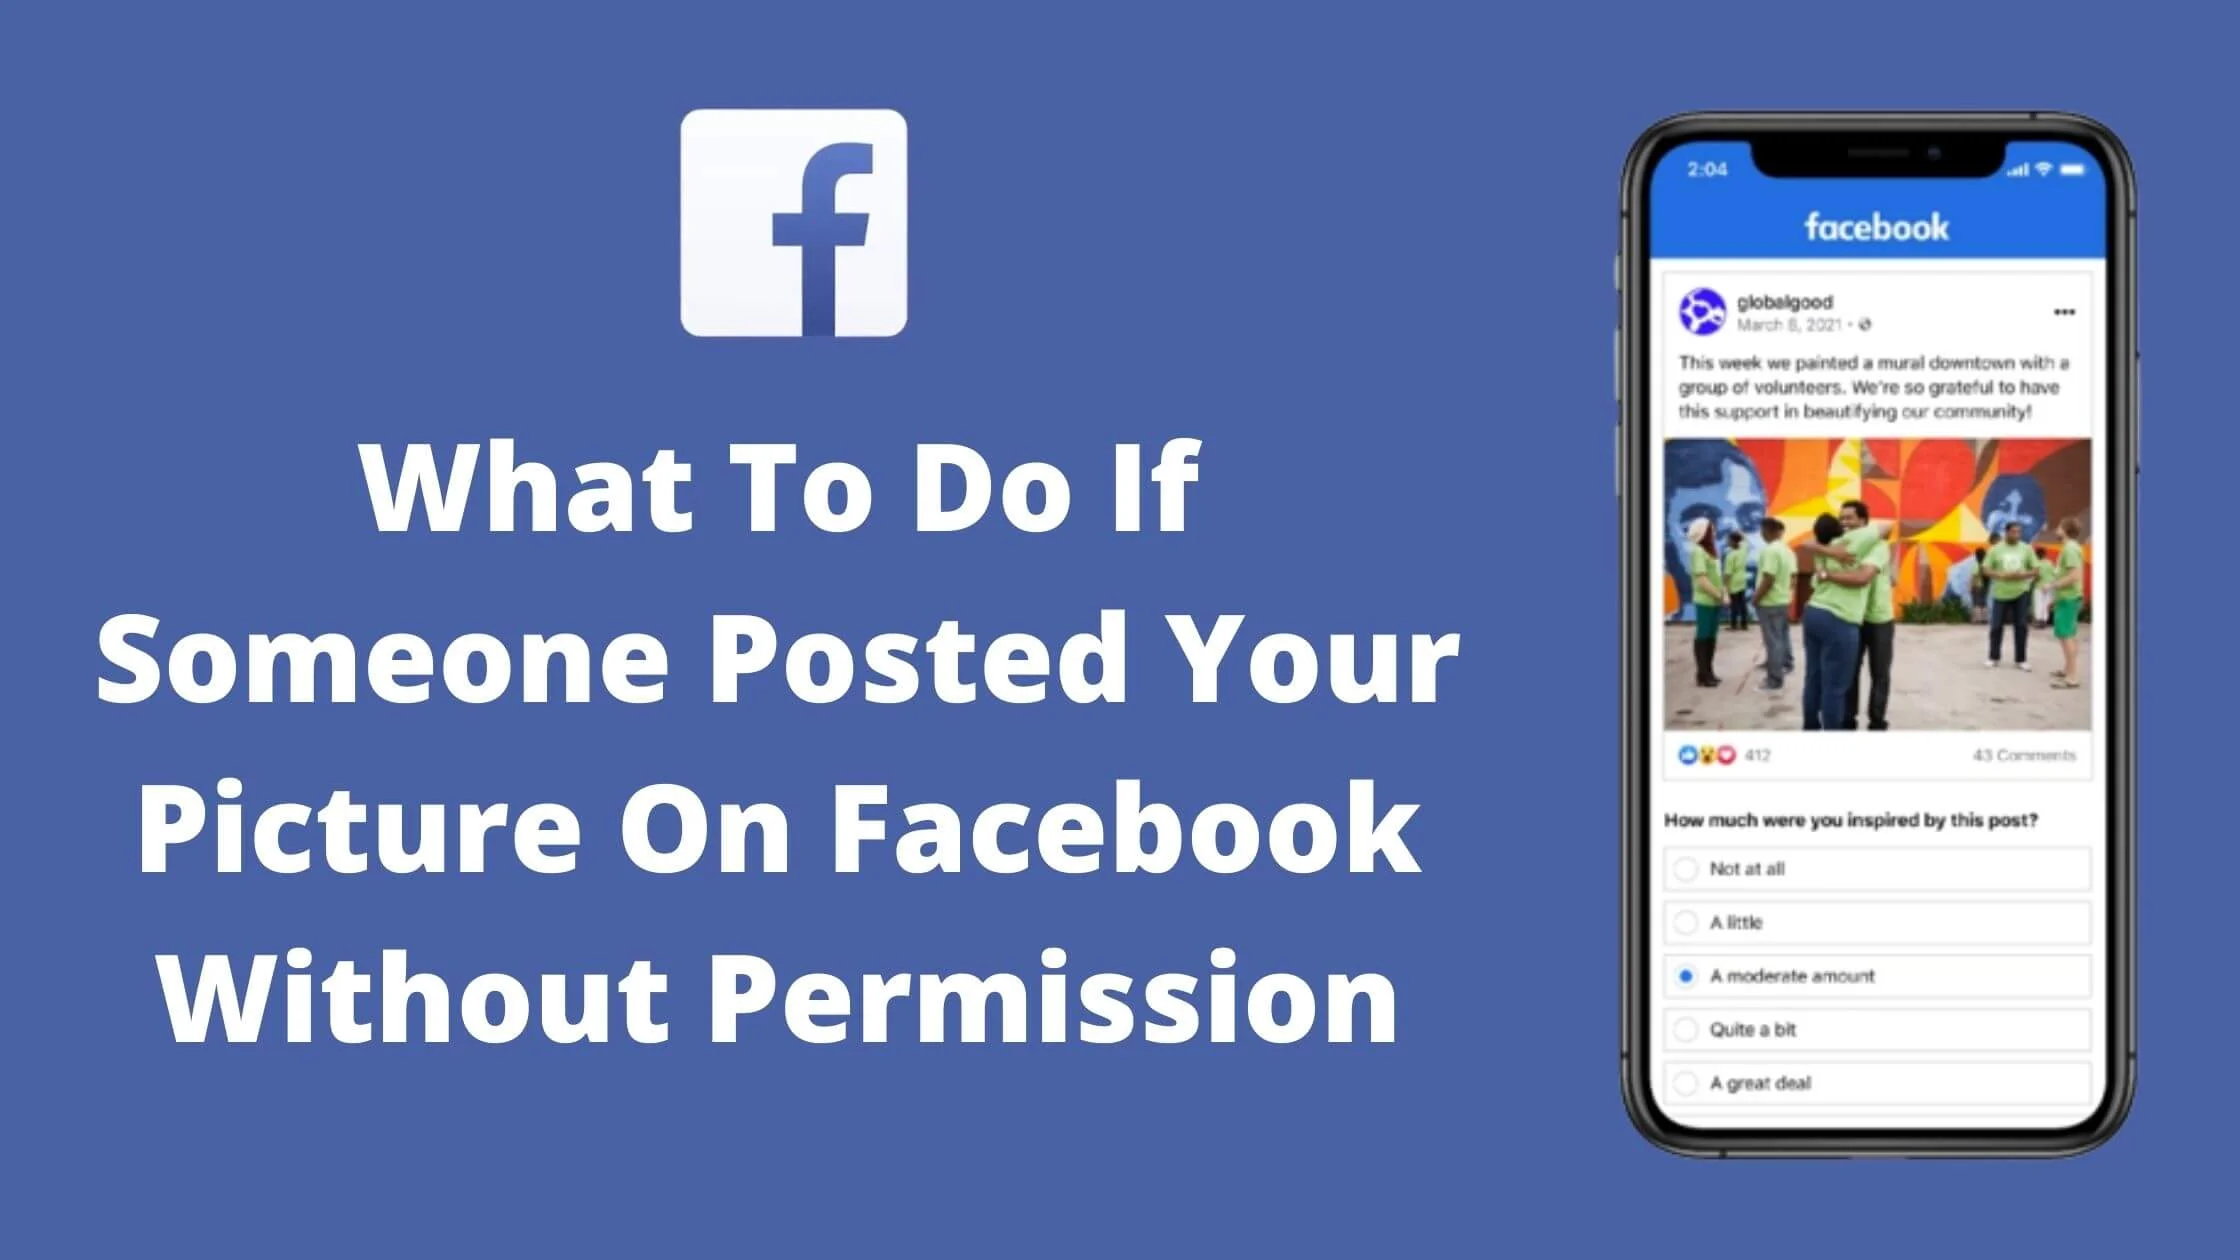 What To Do If Someone Posted Your Picture On Facebook Without Permission